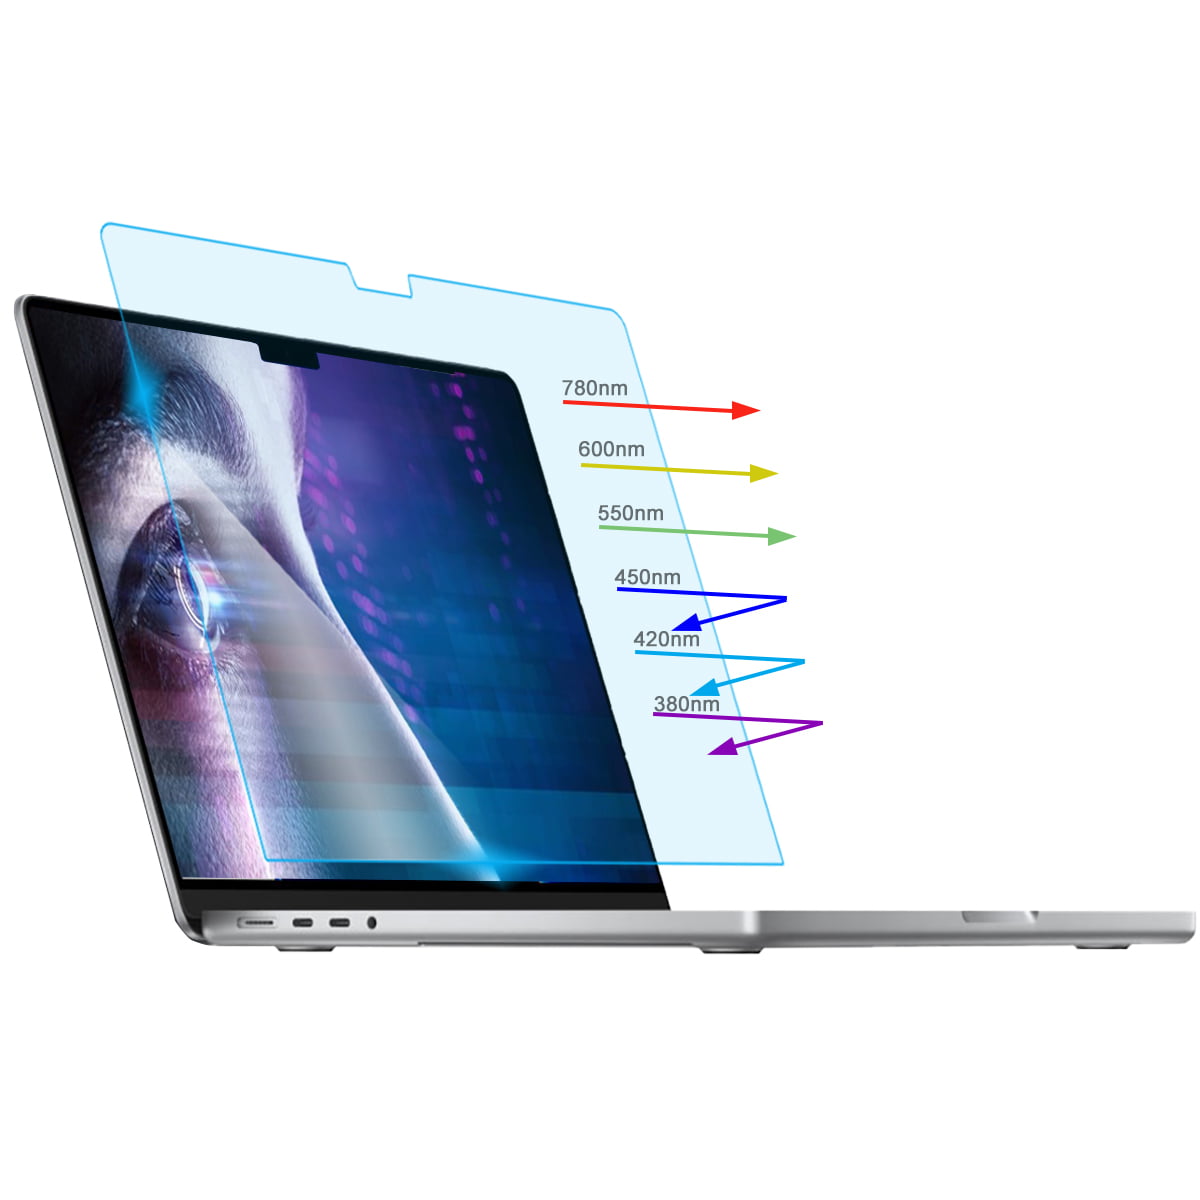 2PACK Screen Protector for 2021 MacBook Pro 14 Inch Anti Blue Light Glare Screen Protector Filter for 2021 Newest MacBook Pro 14 inch M1 Pro/Max Chip A2442 Laptop Blue Light Blocking Screen Filter 